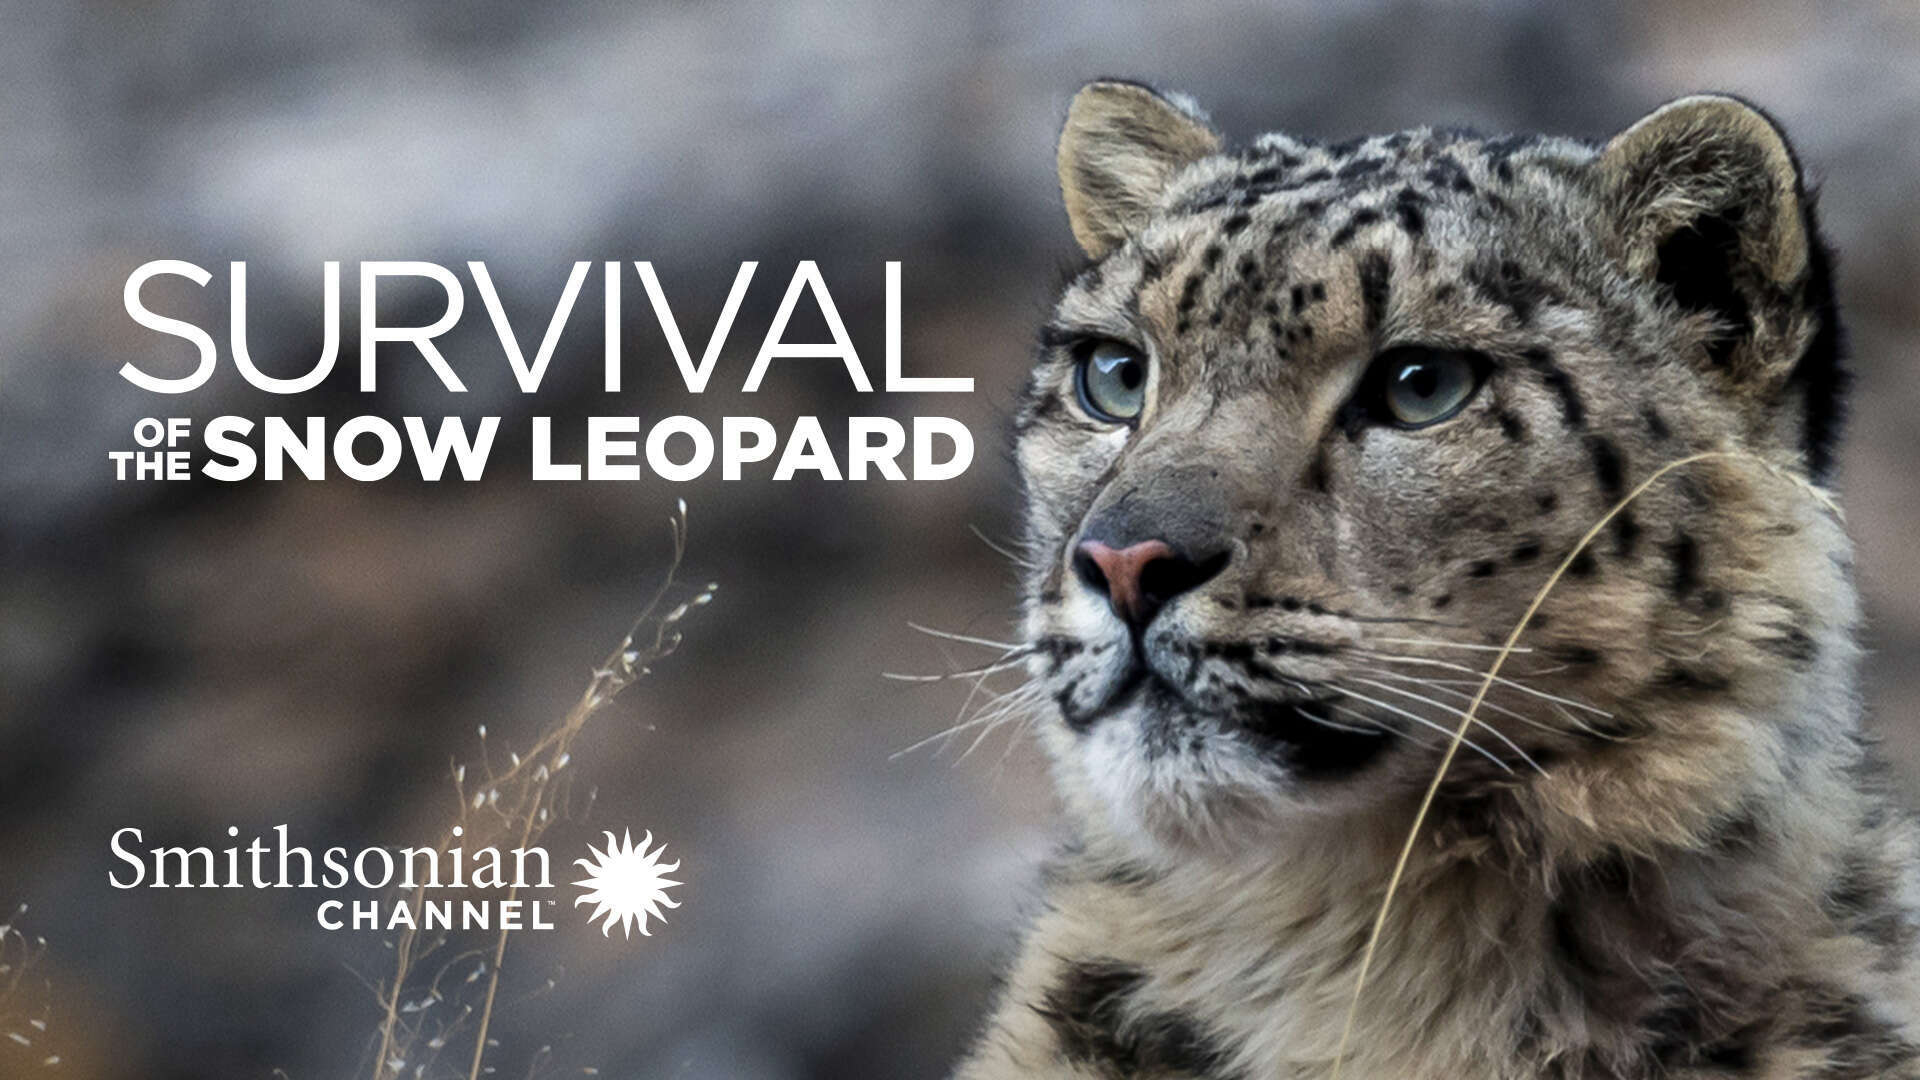 Survival Of The Snow Leopard - Survival Of The Snow Leopard (2020)